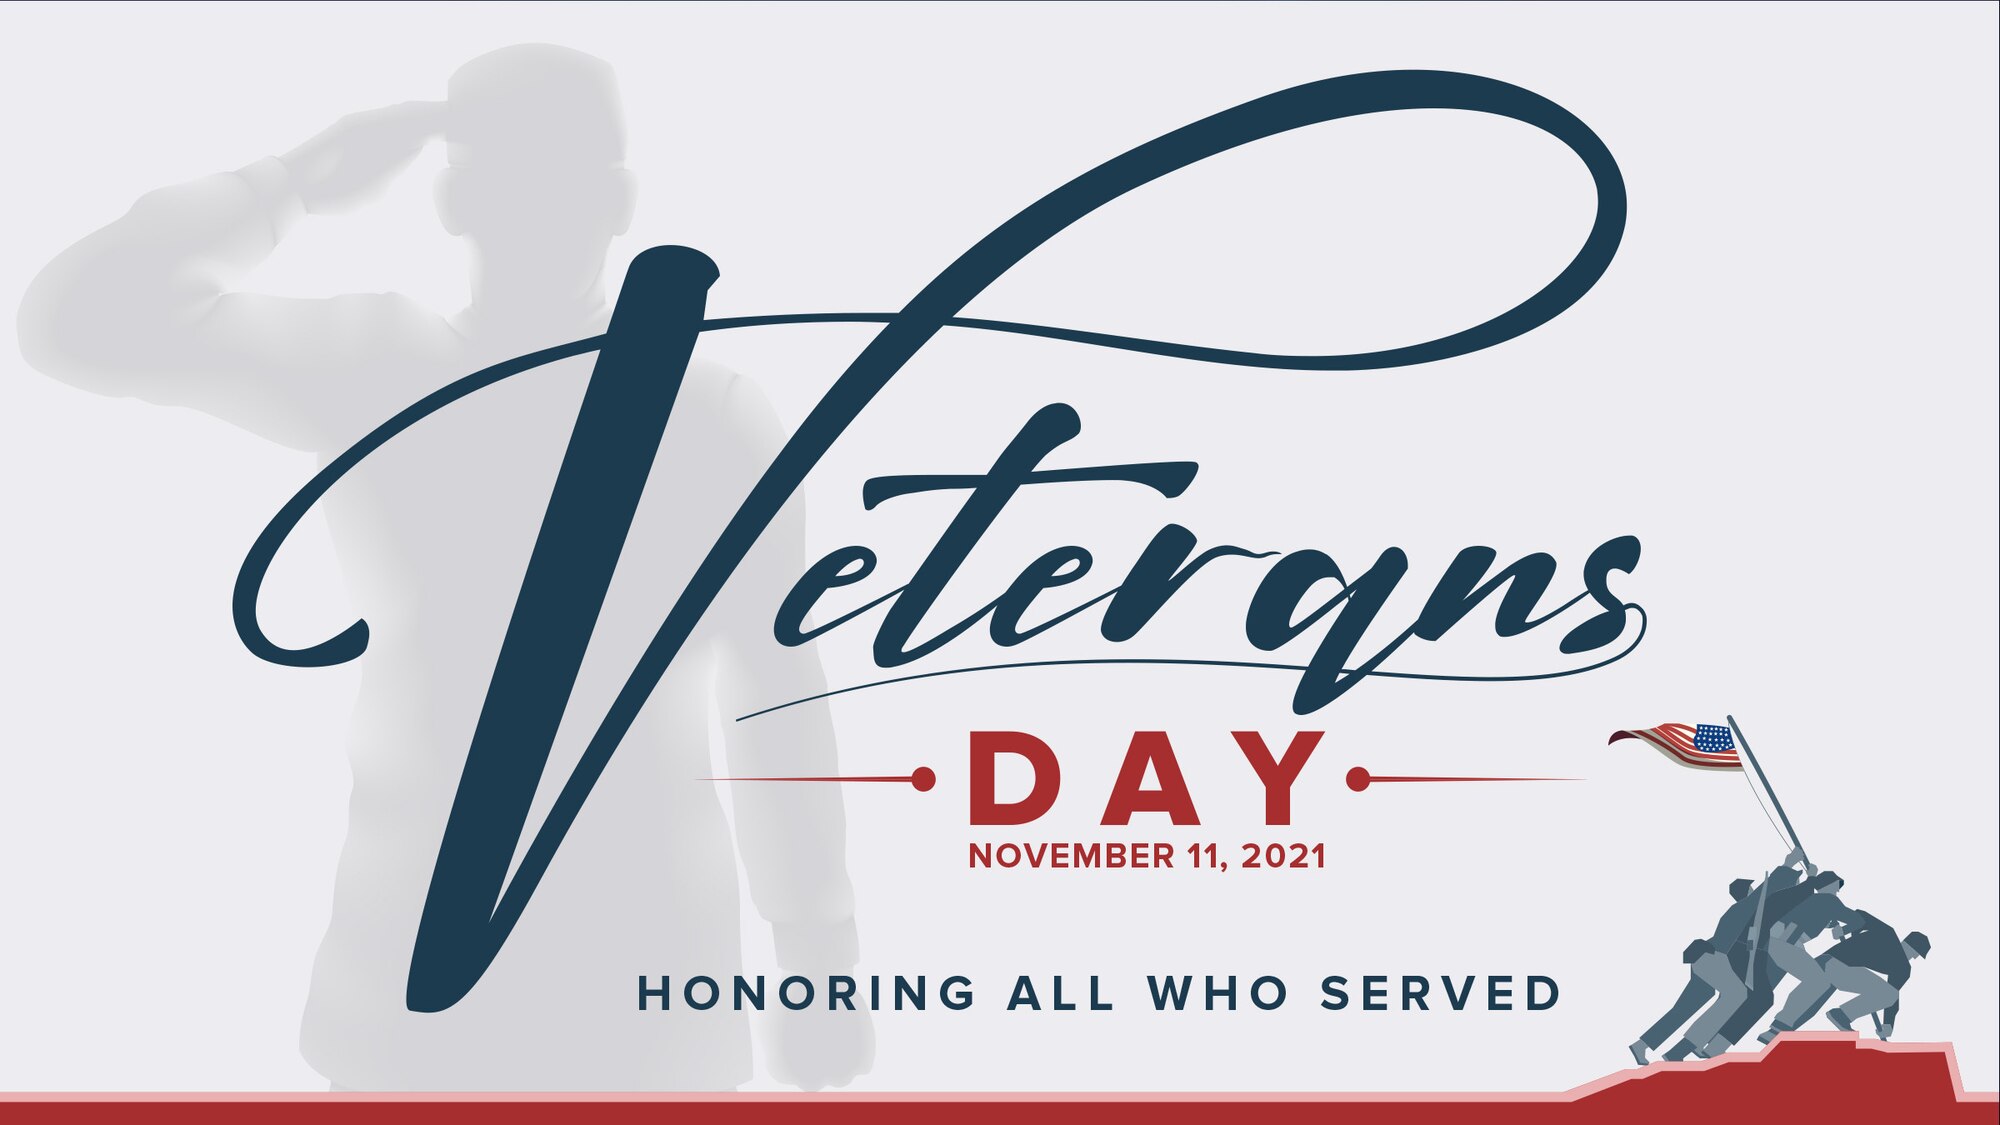 Hill Air Force Base honors all who have served and who continue to serve for something greater than themselves.